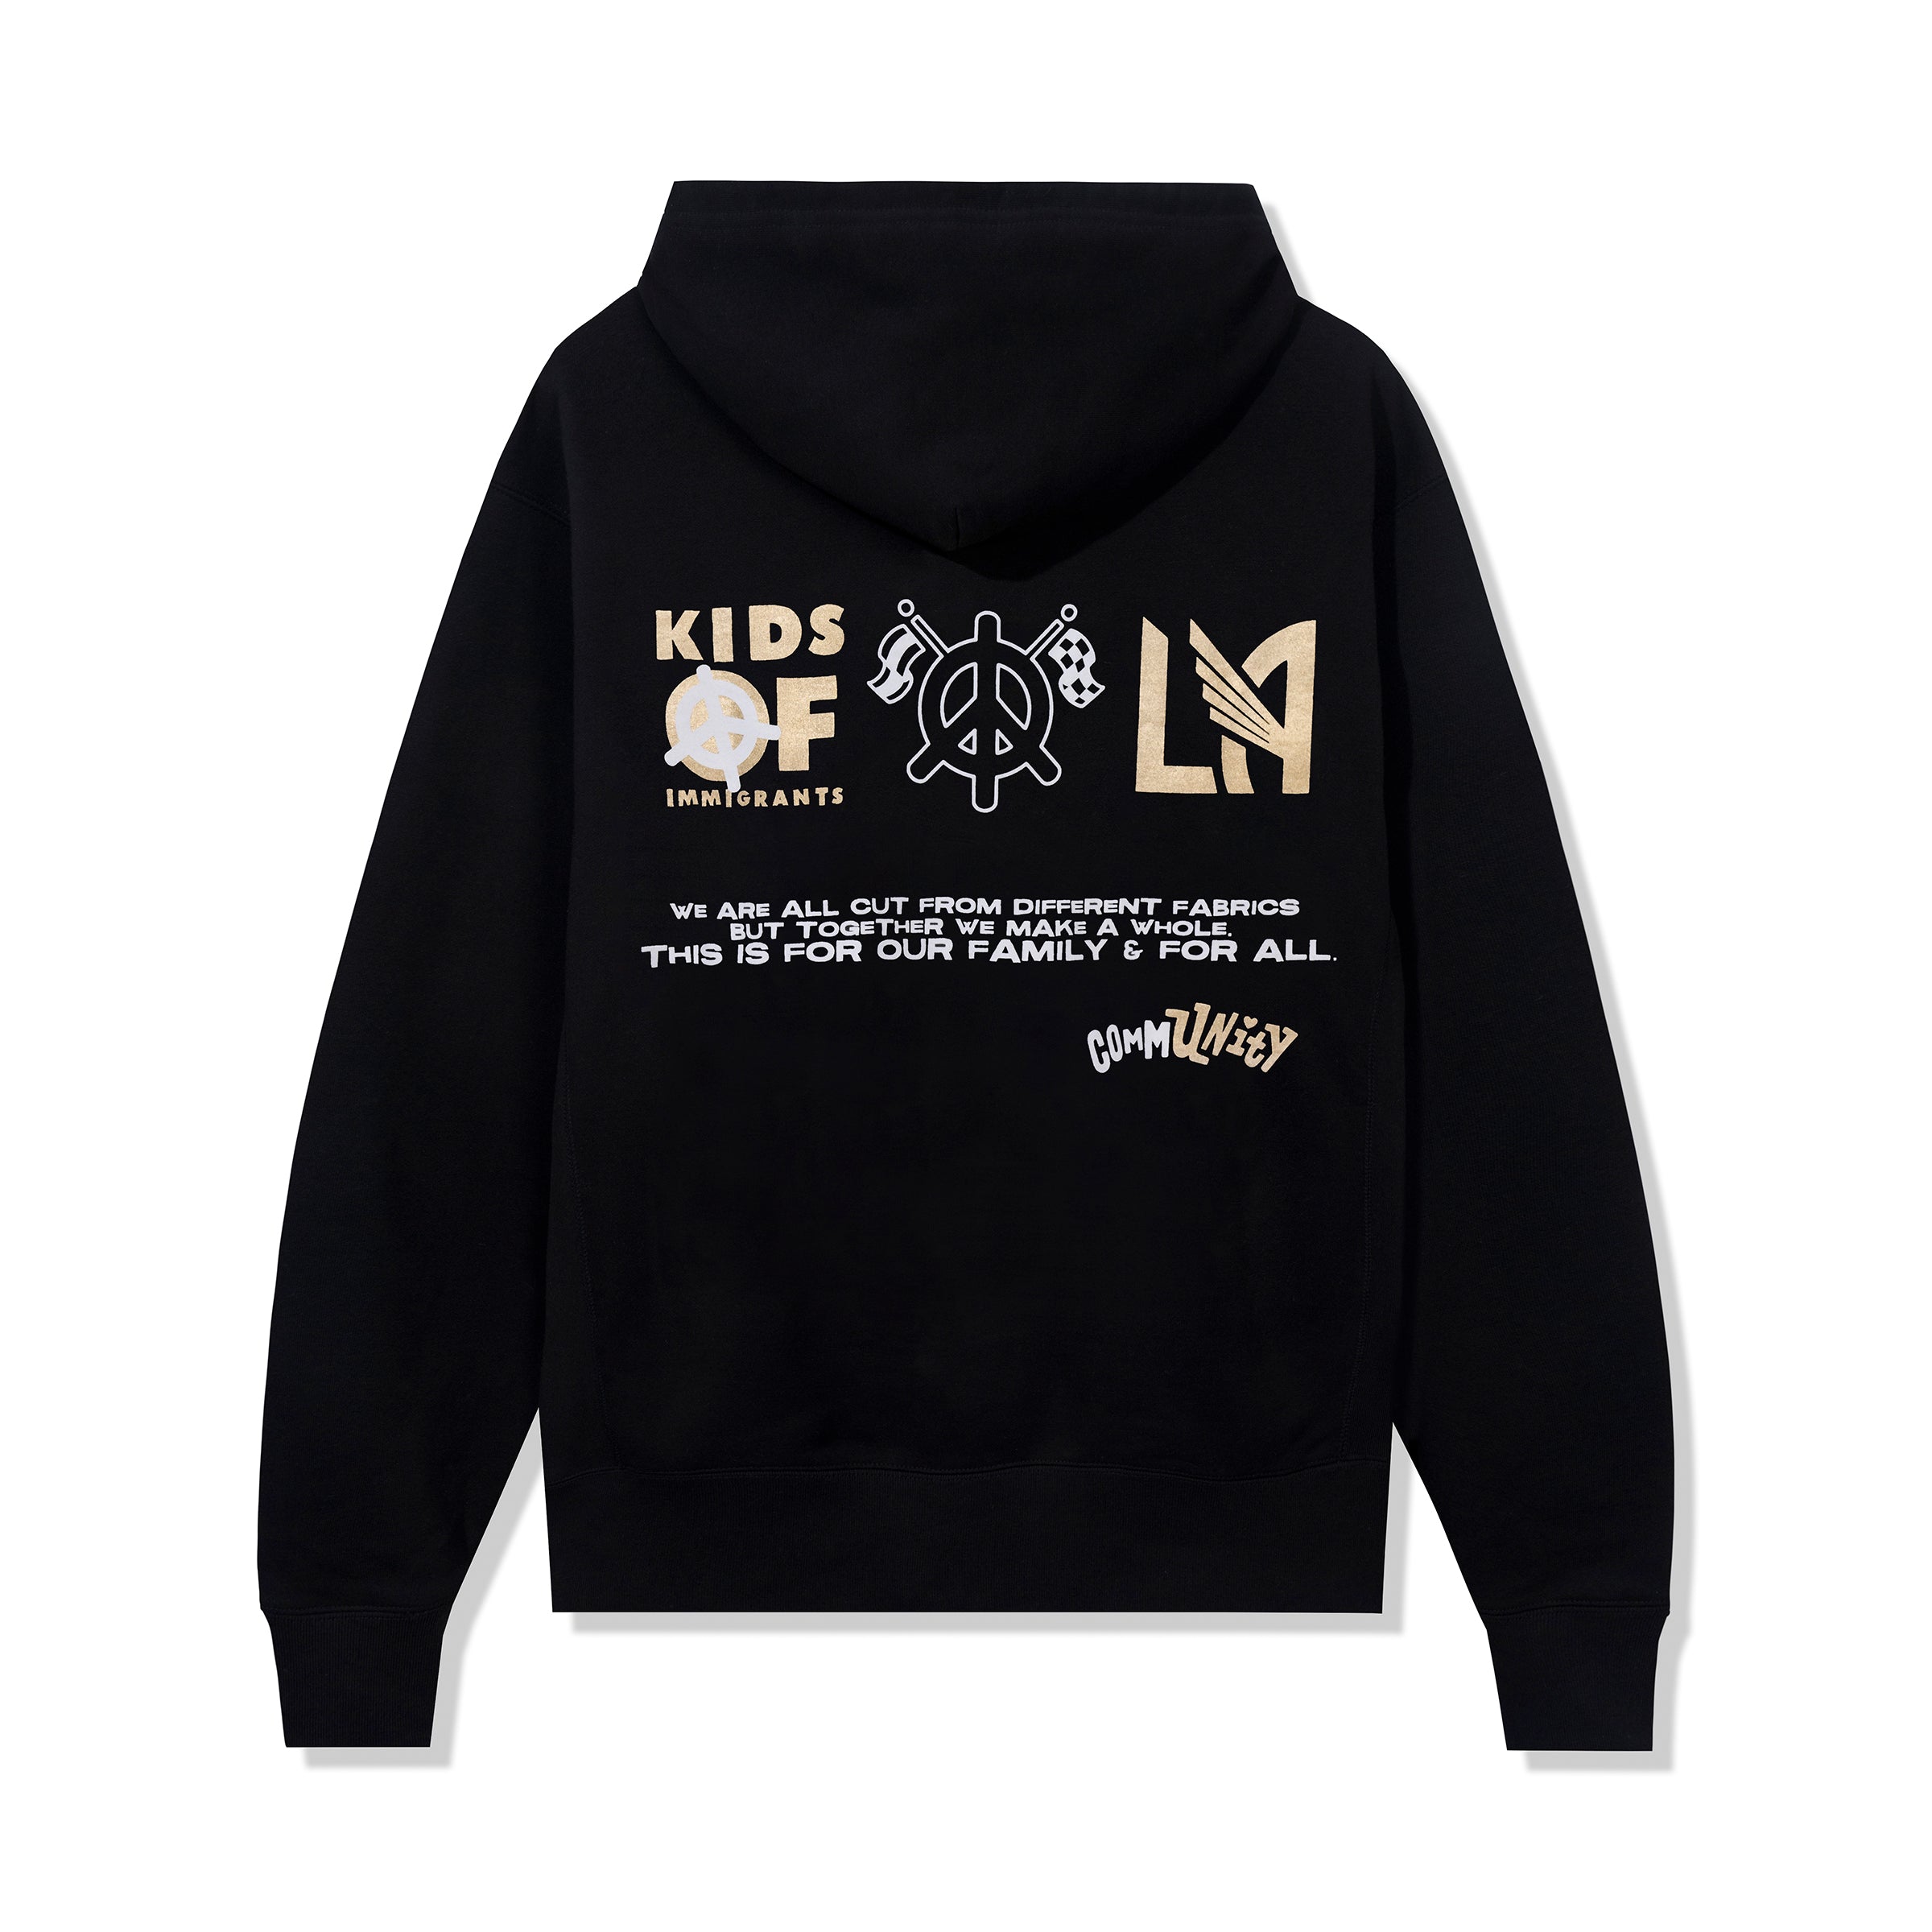 IMMIGRANTS FOR LAFC HOODIE - BLACK